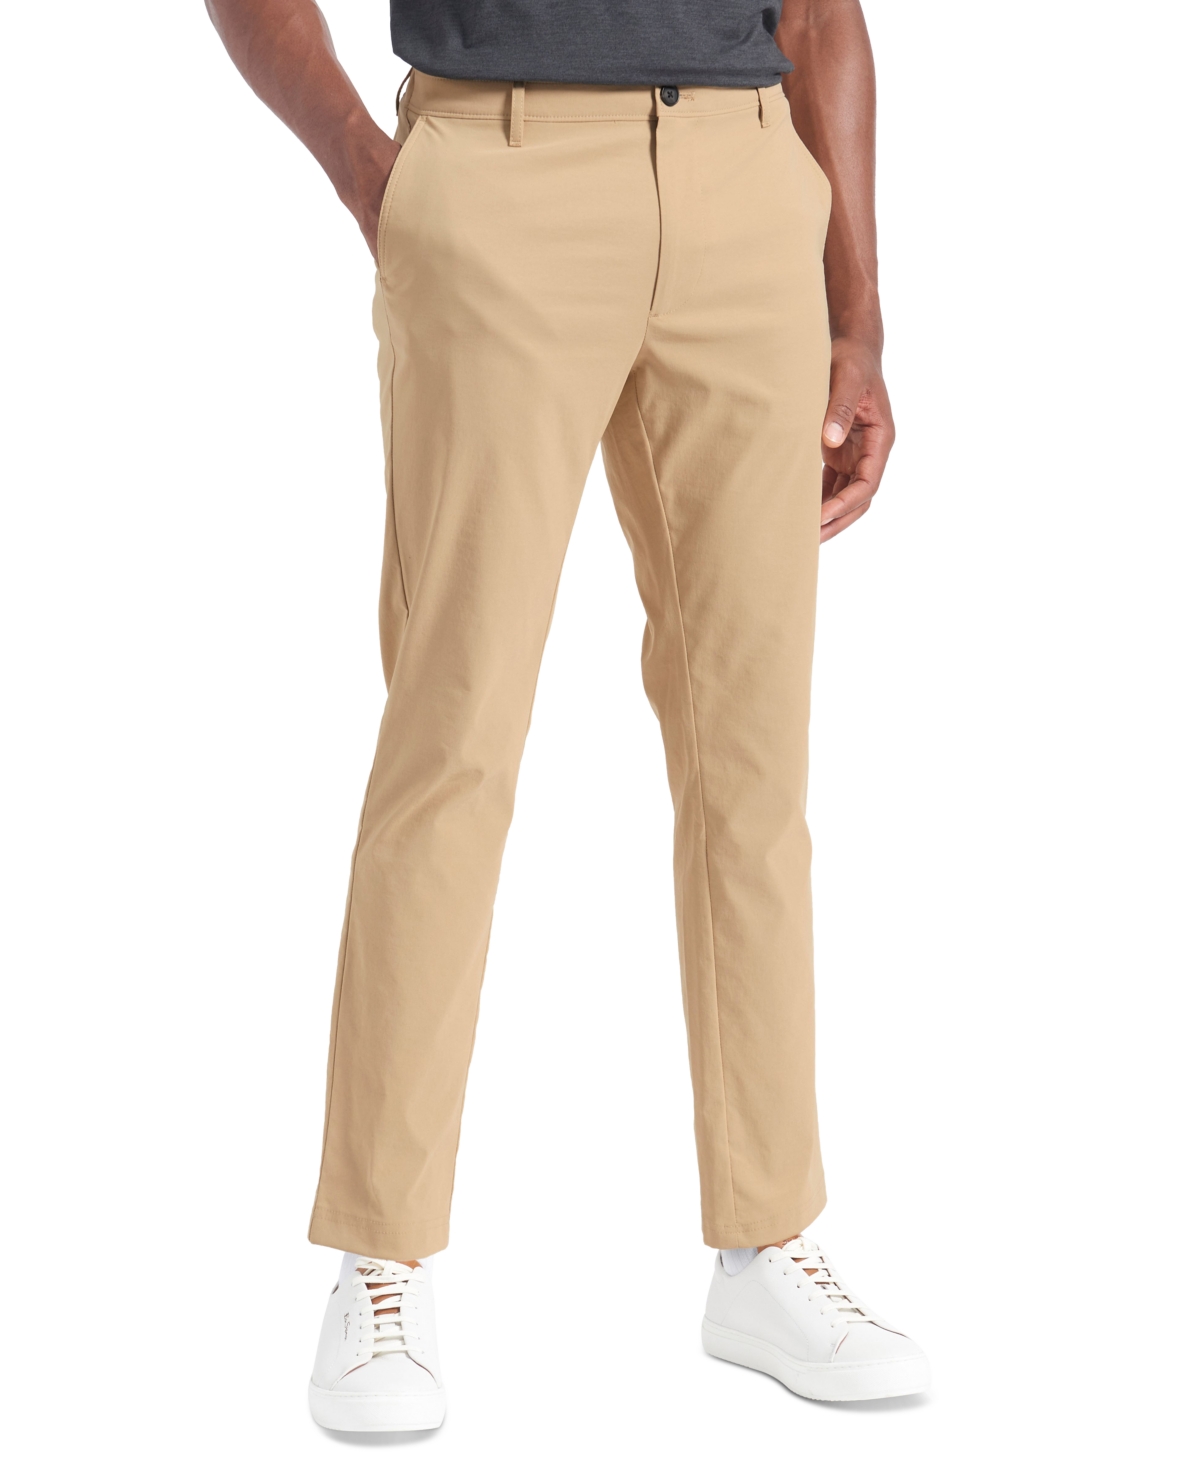 Men's Slim-Fit Stretch Quick-Dry Motion Performance Chino Pants - Sand